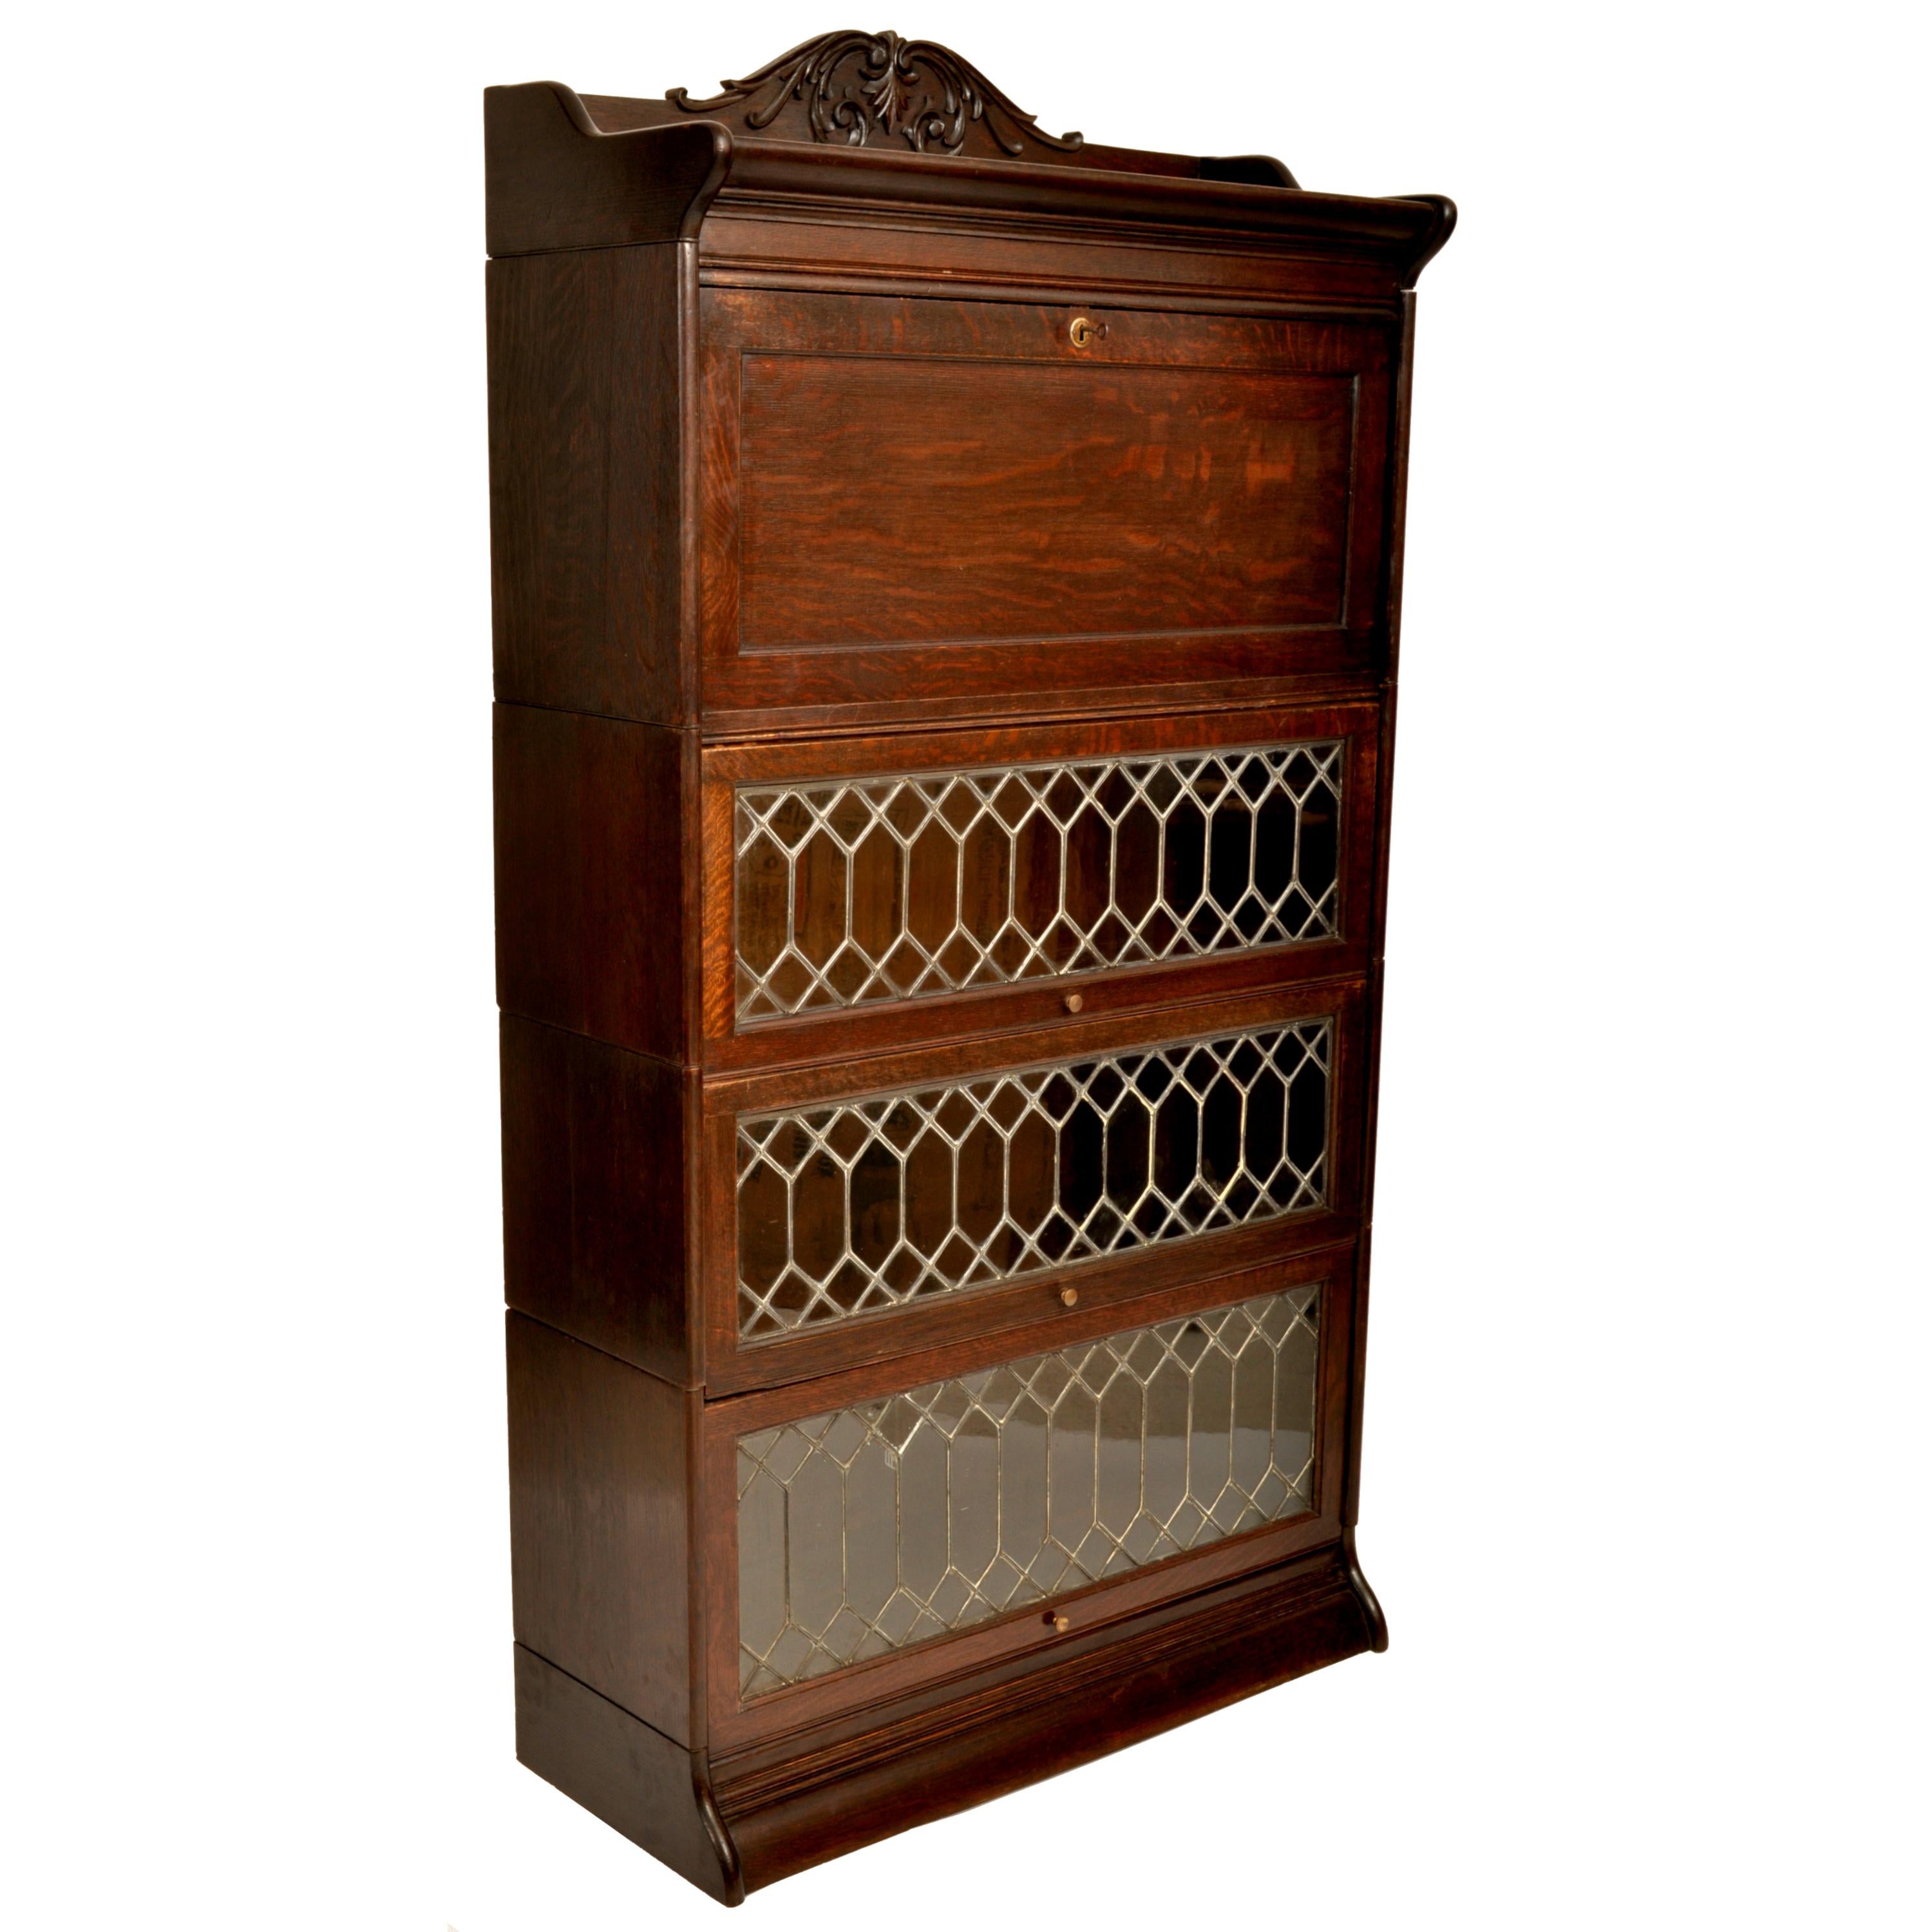 A good antique American Arts & Crafts oak lawyer's/barrister's bookcase/desk, circa 1900.
The six section bookcase having an ogee shaped top with a carved crest, below is a locking fall front desk with the original key and a fitted interior